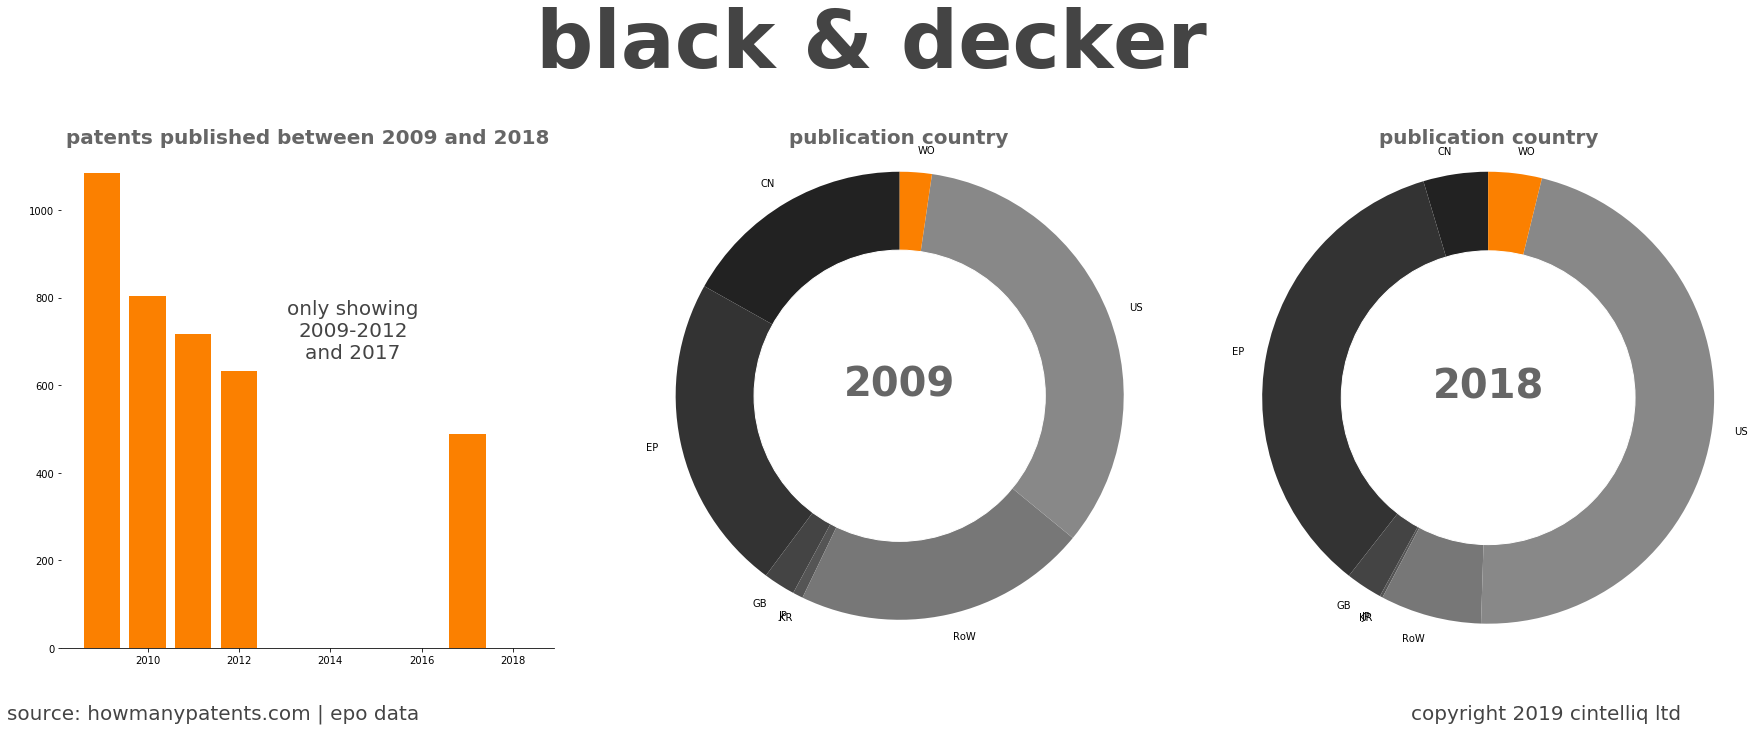 summary of patents for Black & Decker